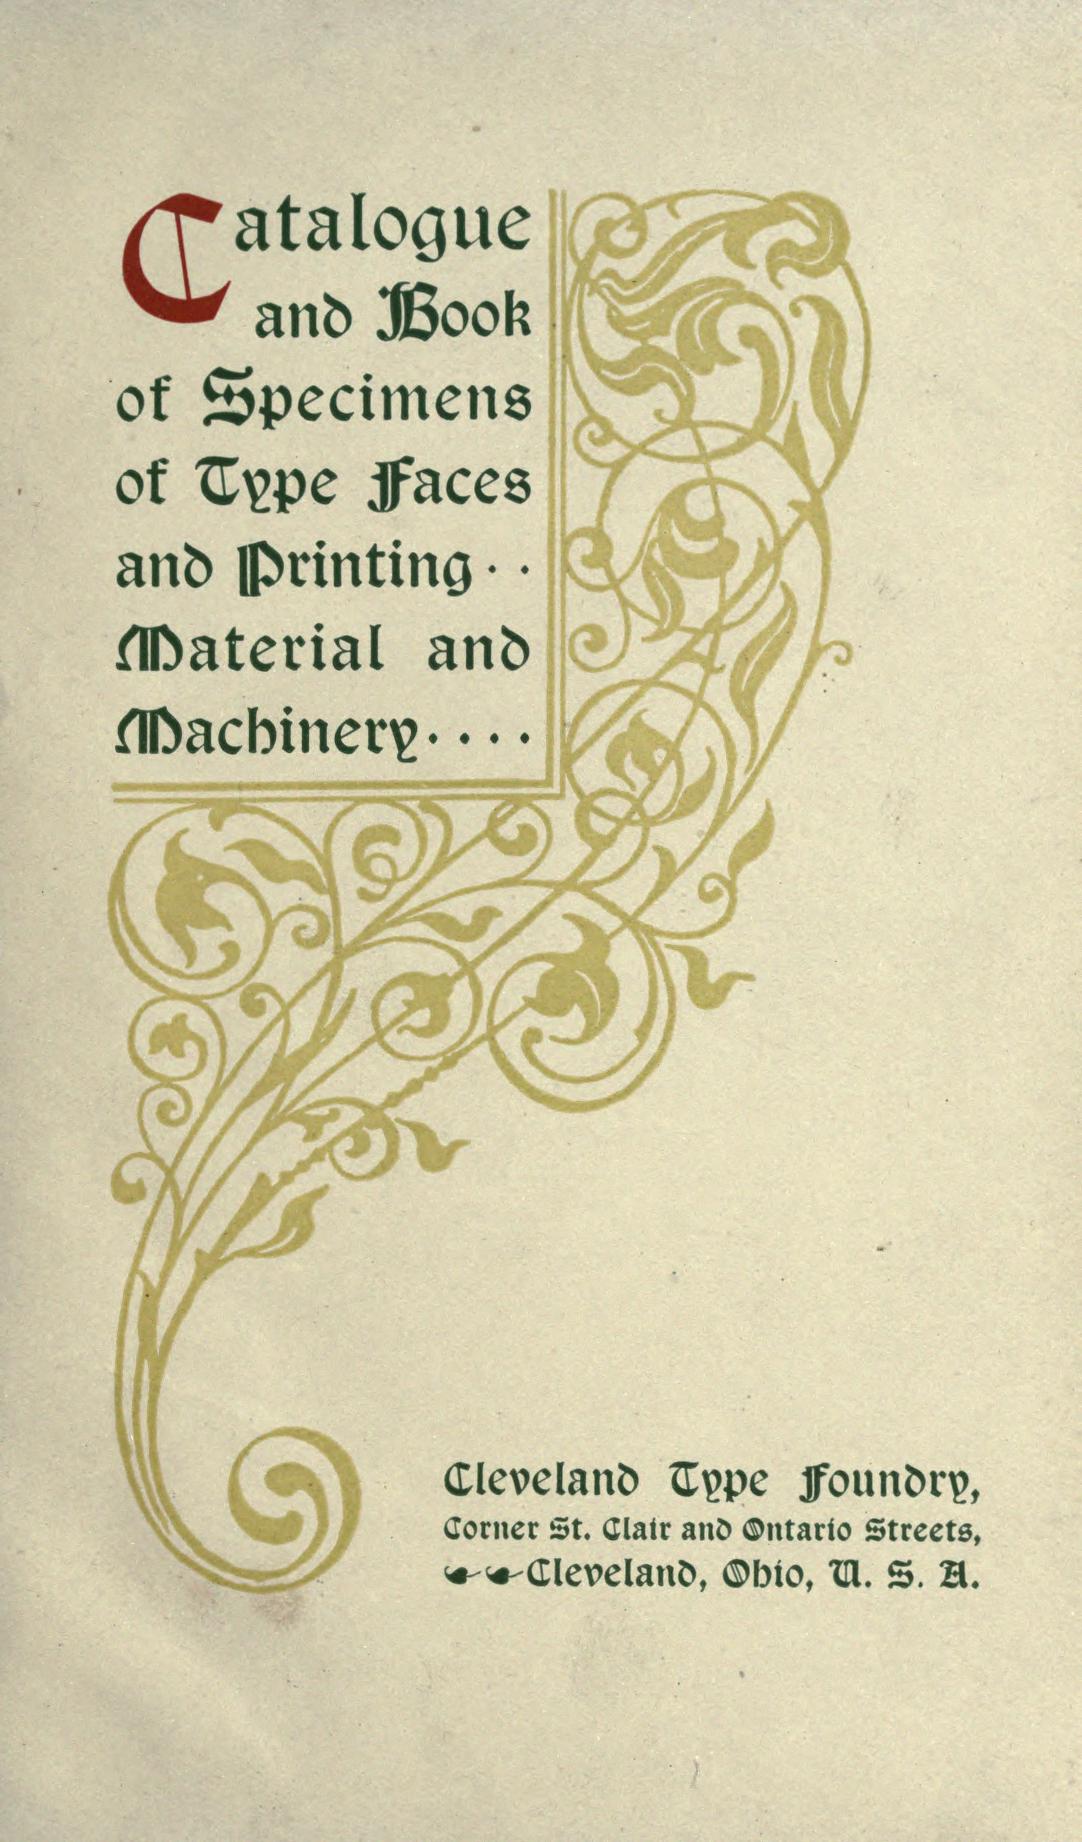 Catalogue and book of specimens of type faces and printing material and machinery by Cleveland Type Foundry. 1 edition (1 ebook) - first published in 1895